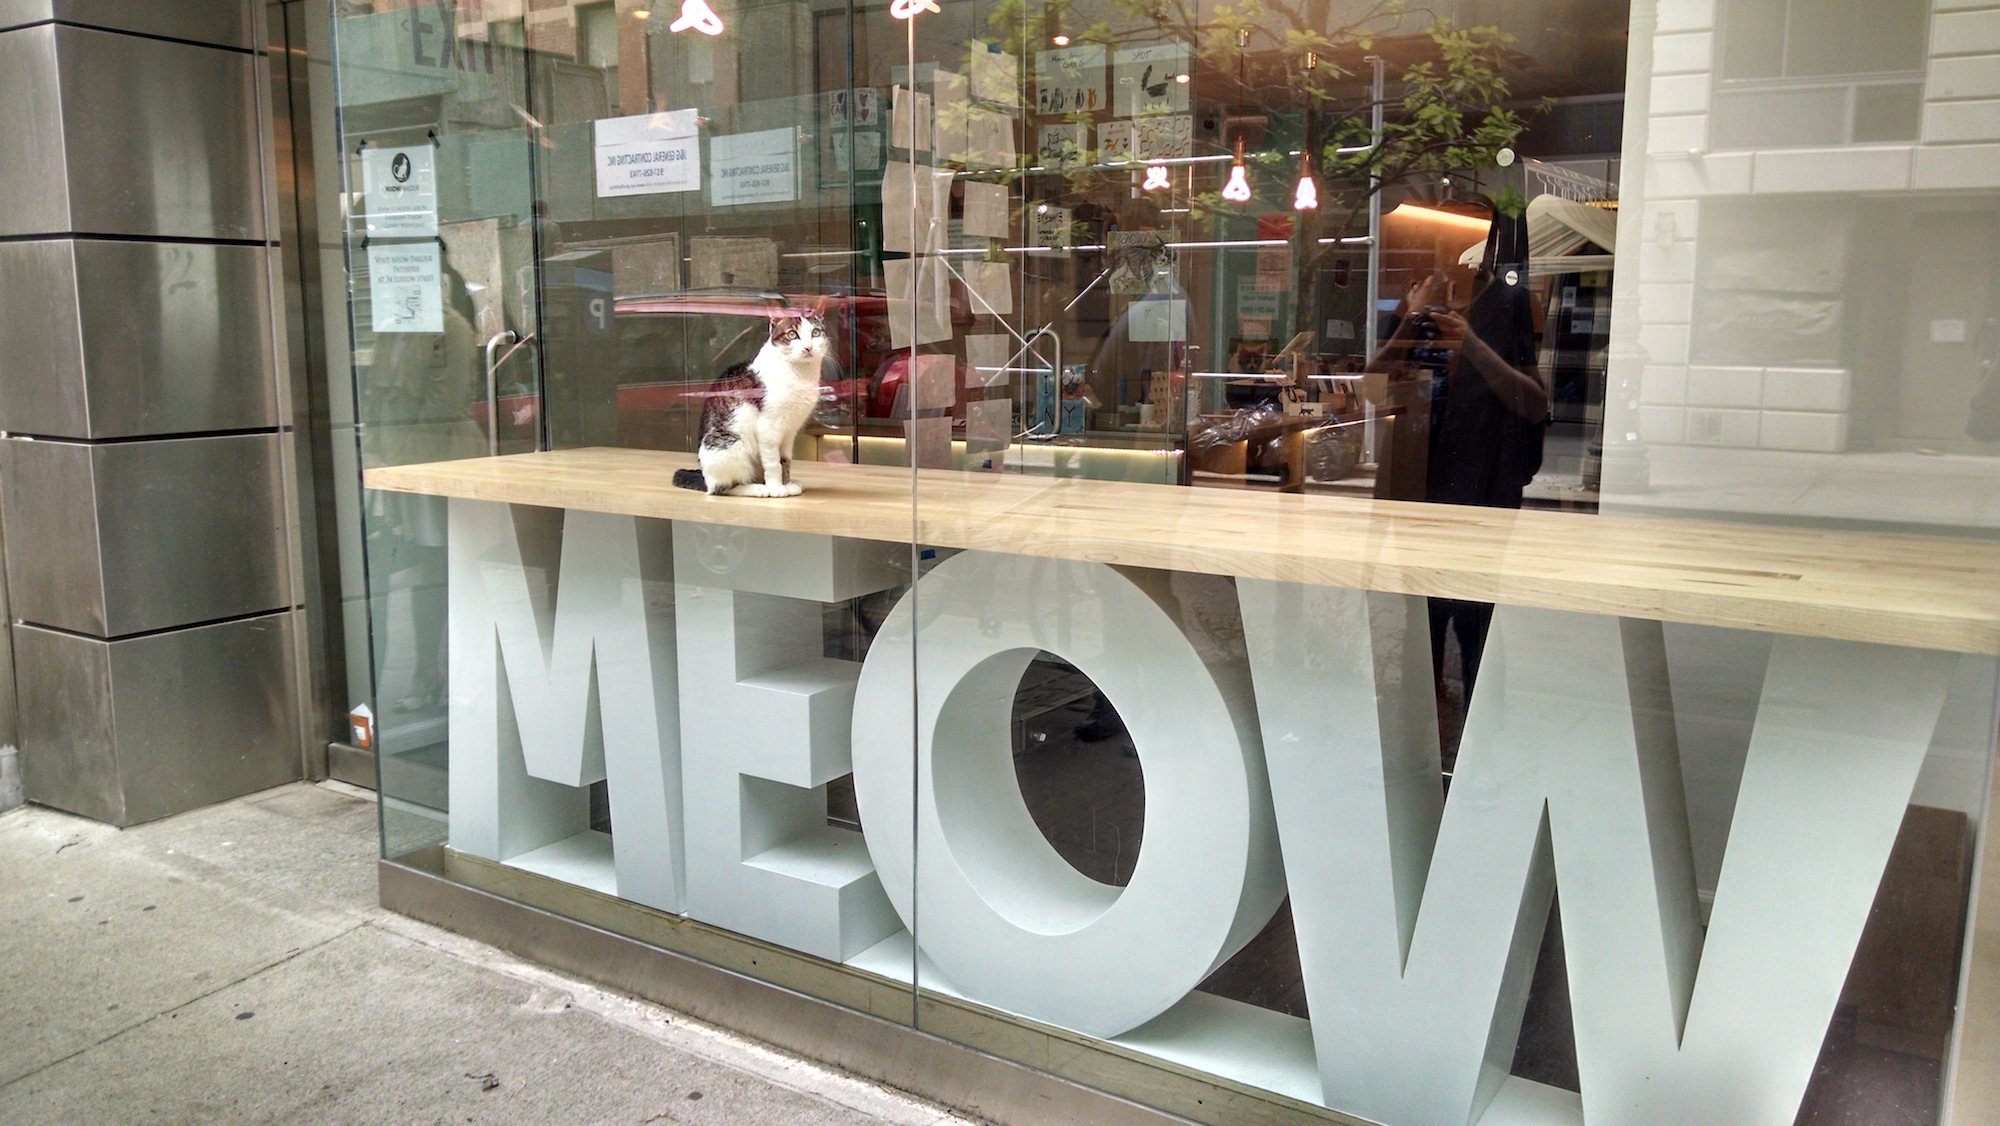 Inside the Meow Parlour cat cafe in New York City chewy travels